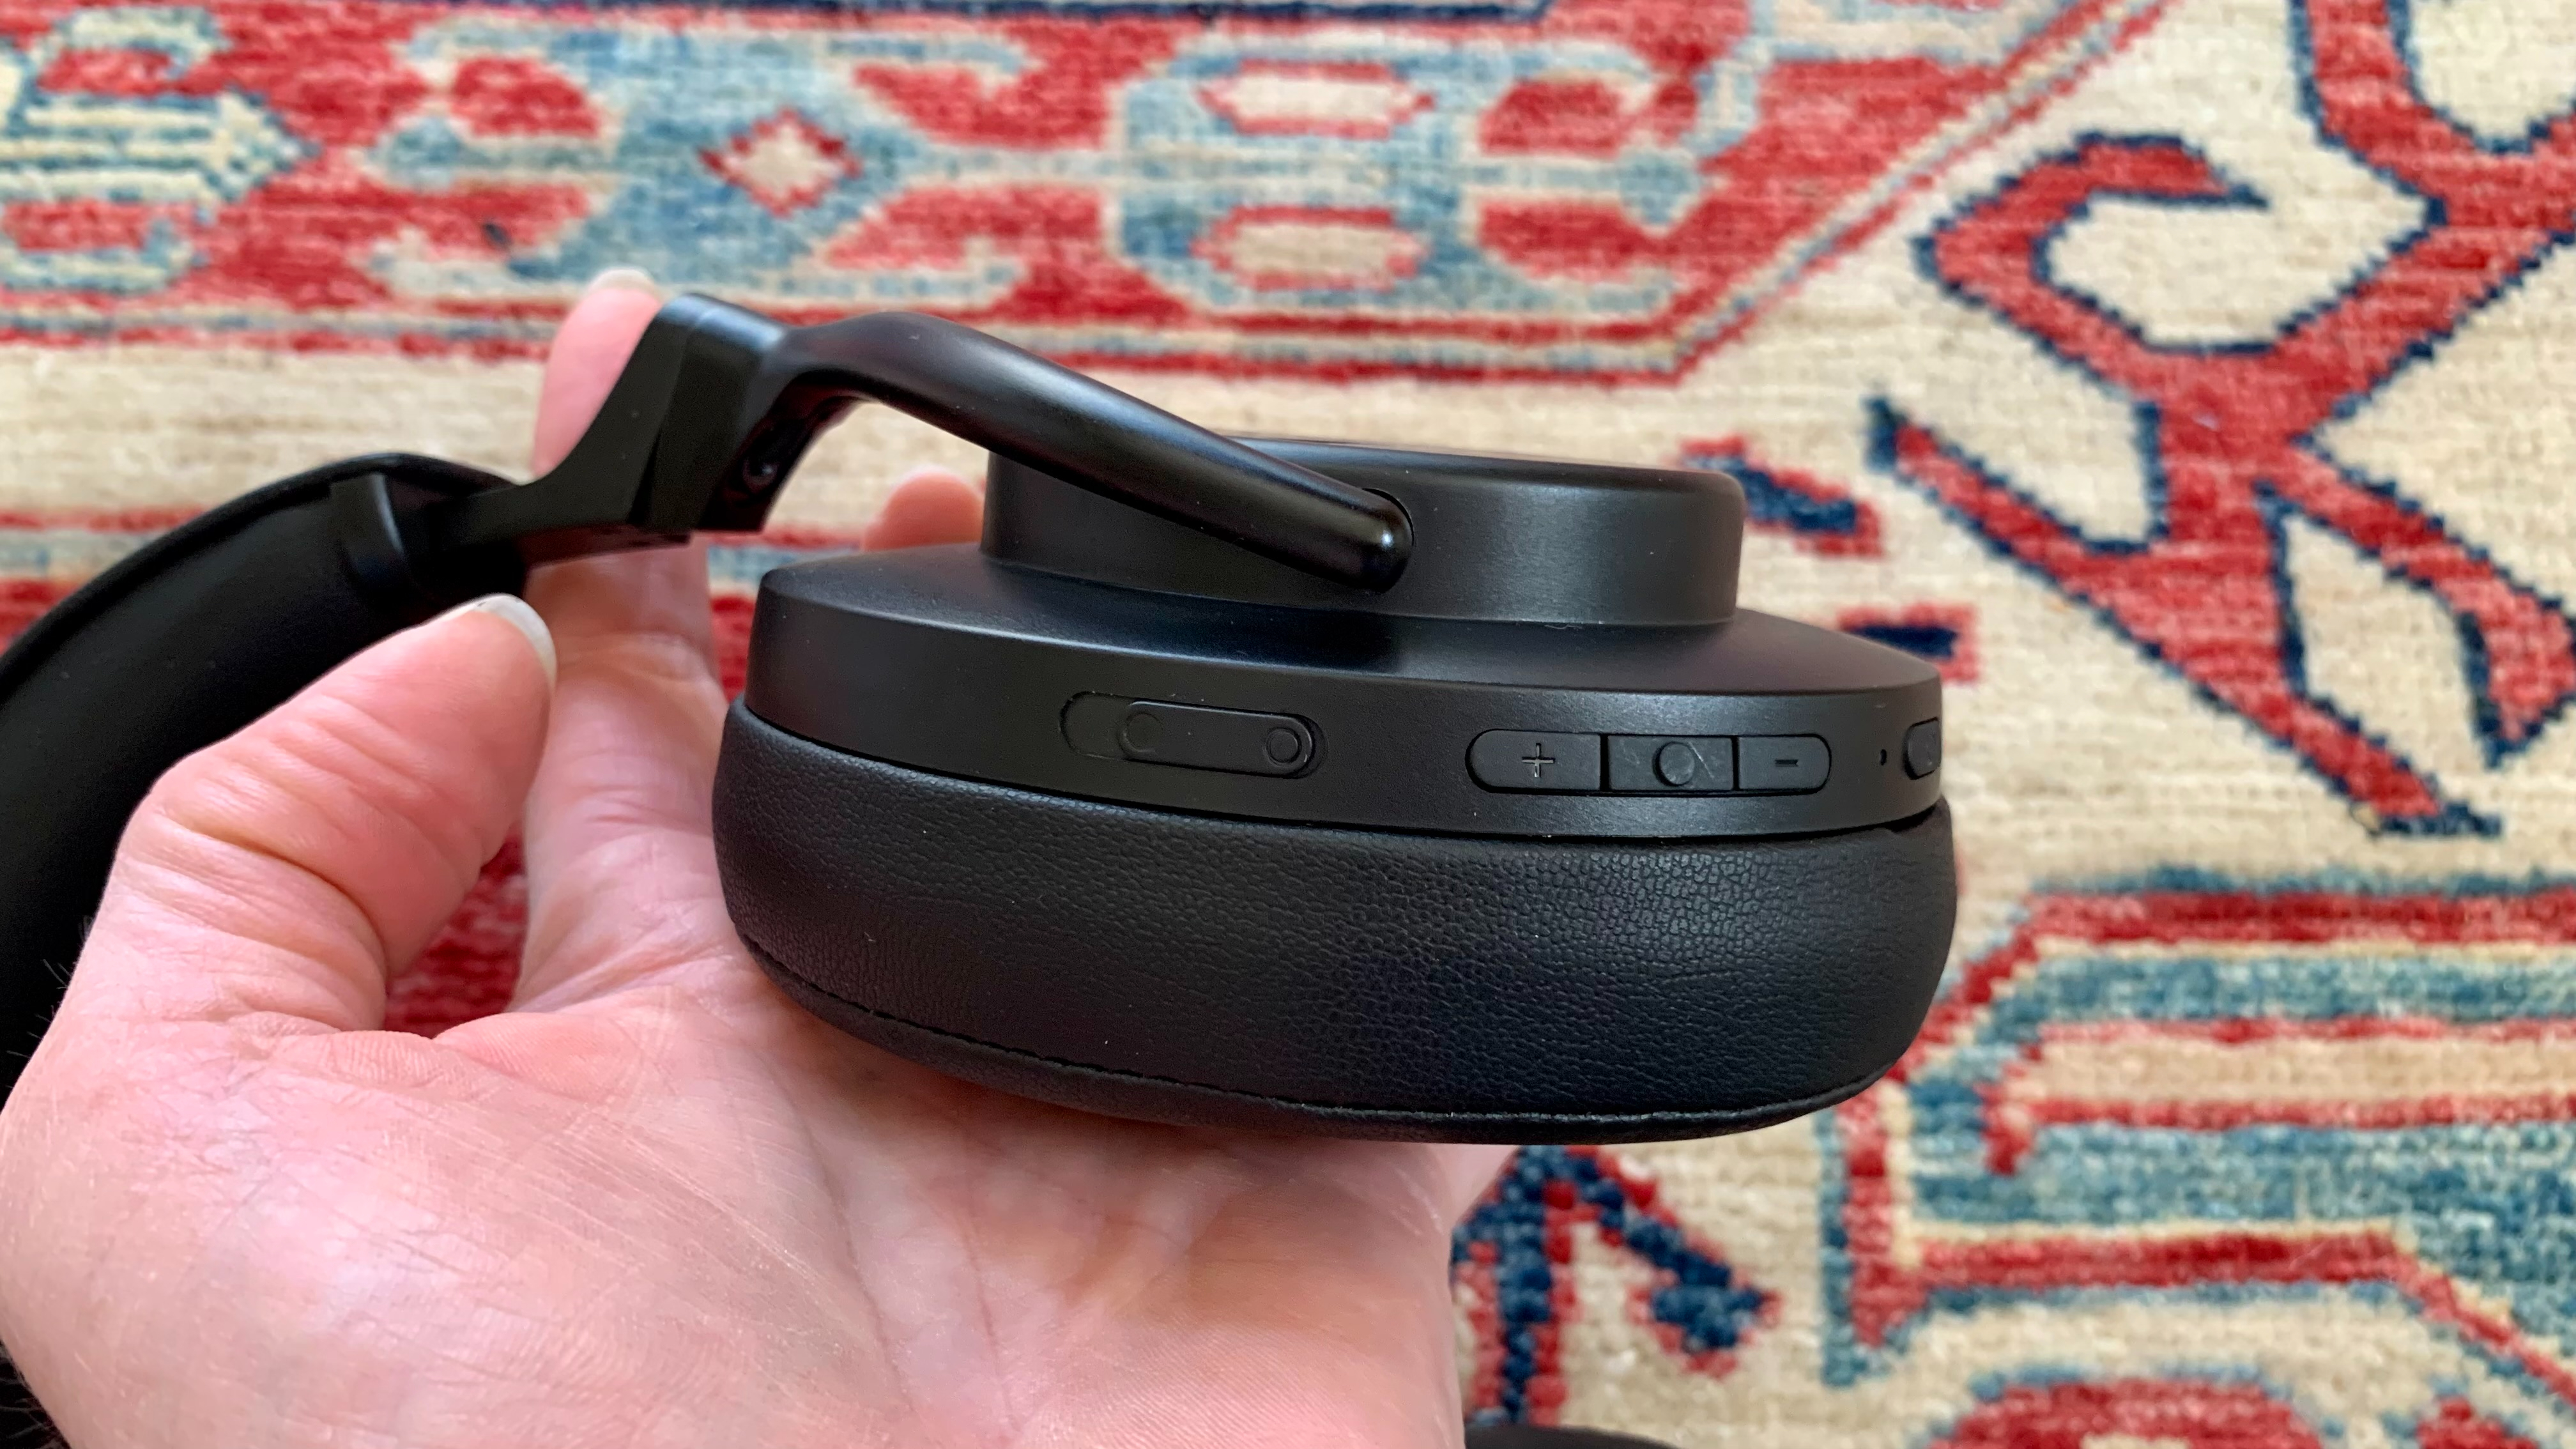 Shure Aonic 50 headphones held in a hand showing detail on the earcup